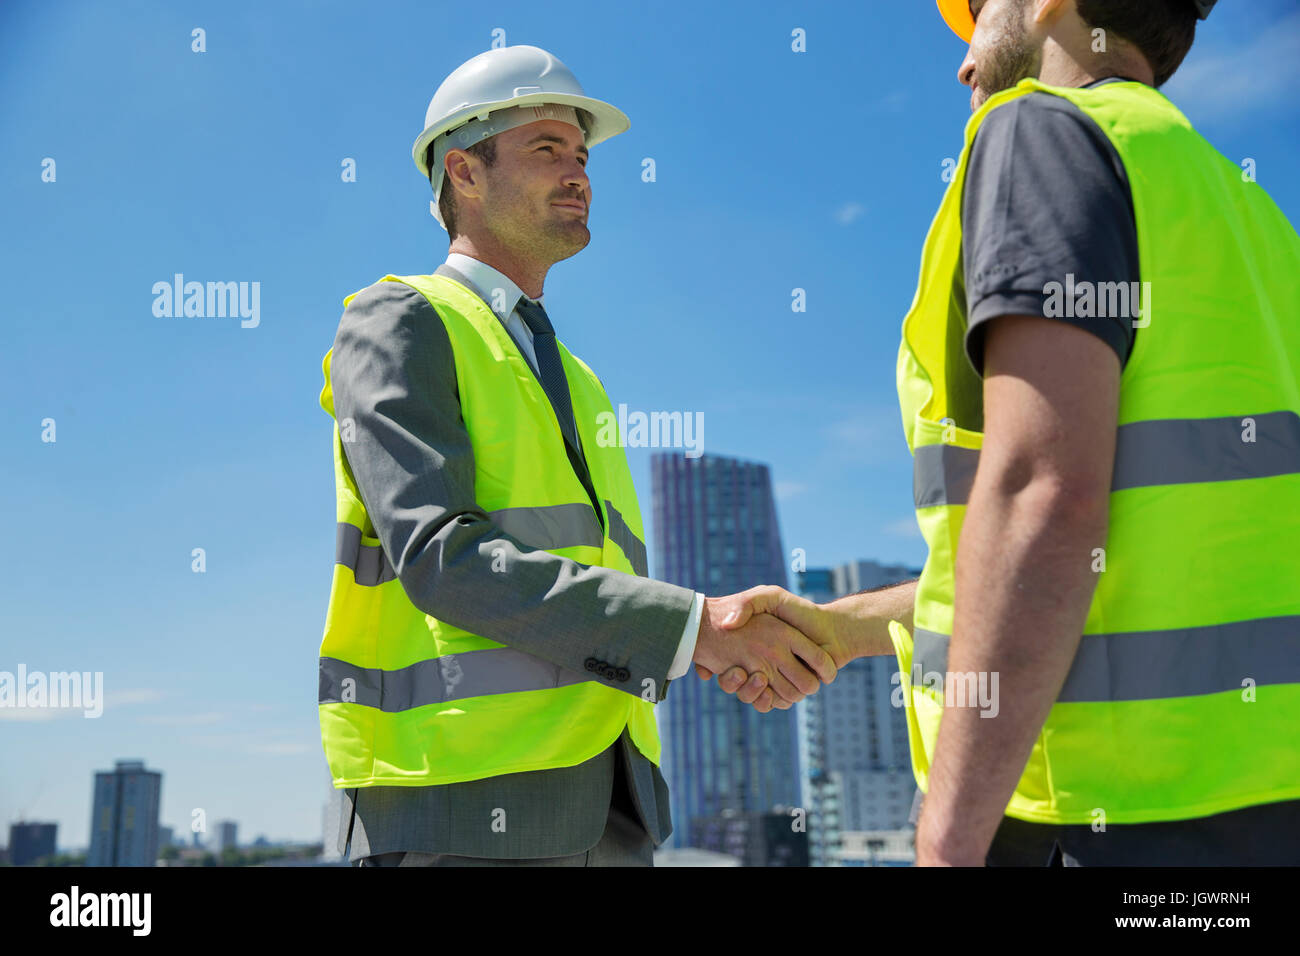 Two men wearing hard hats and safety vests Image & Design ID 0000393107 